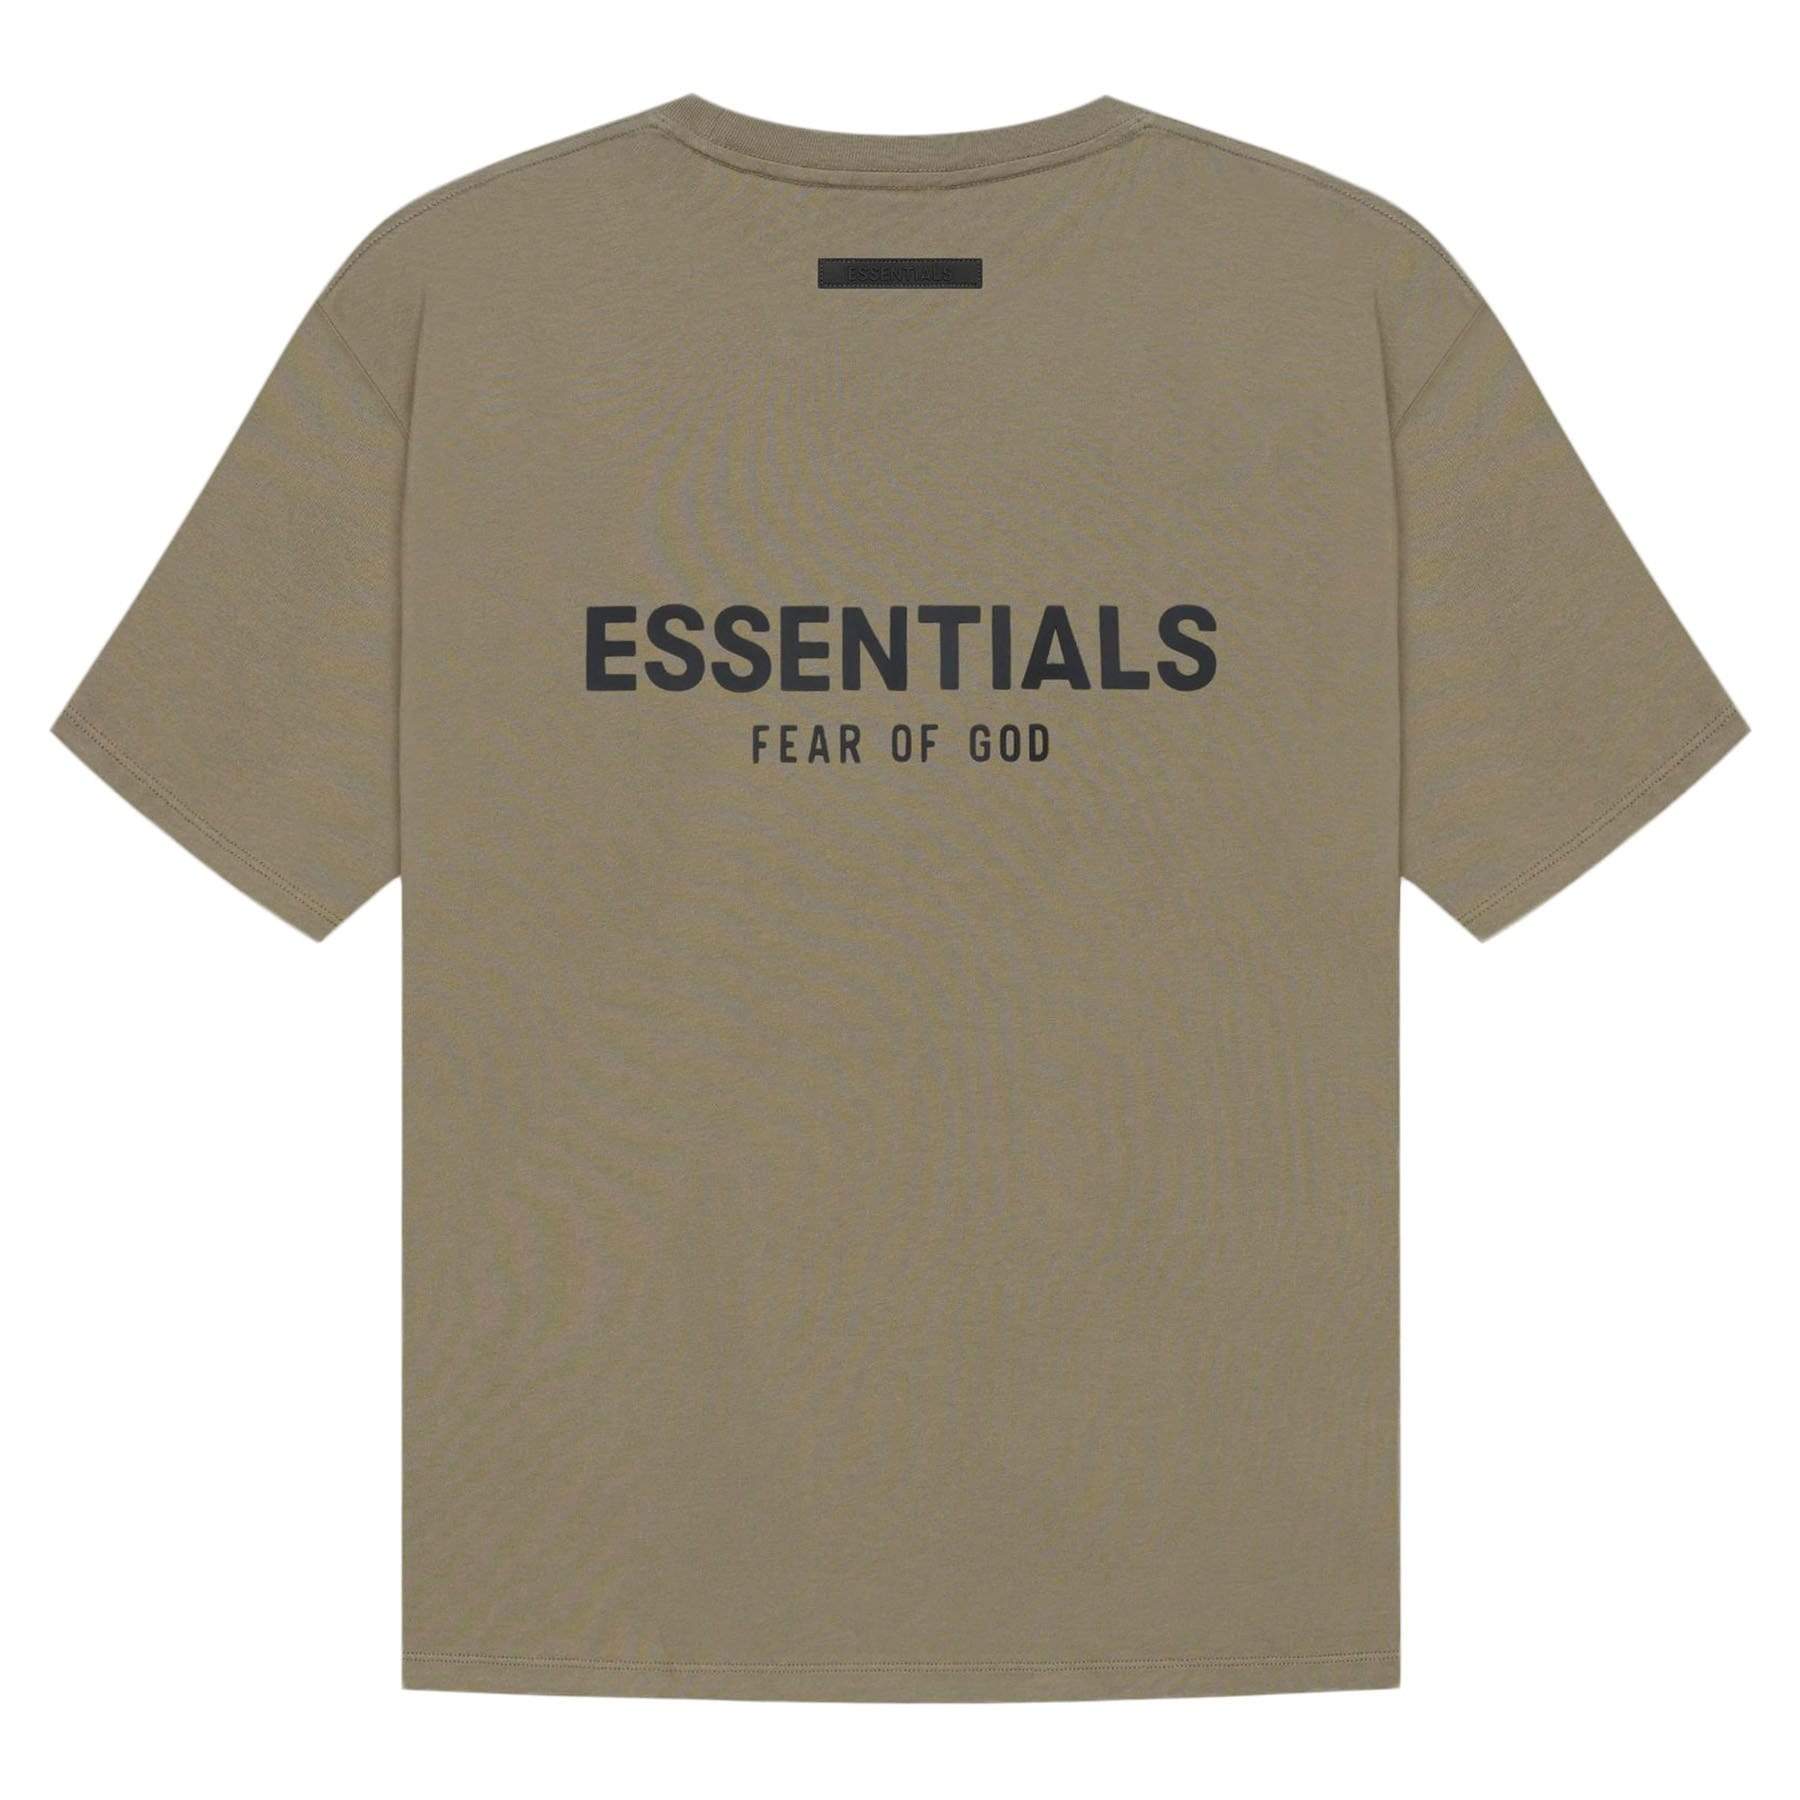 FEAR OF GOD ESSENTIALS T-SHIRT ‘TAUPE’ (SS21)